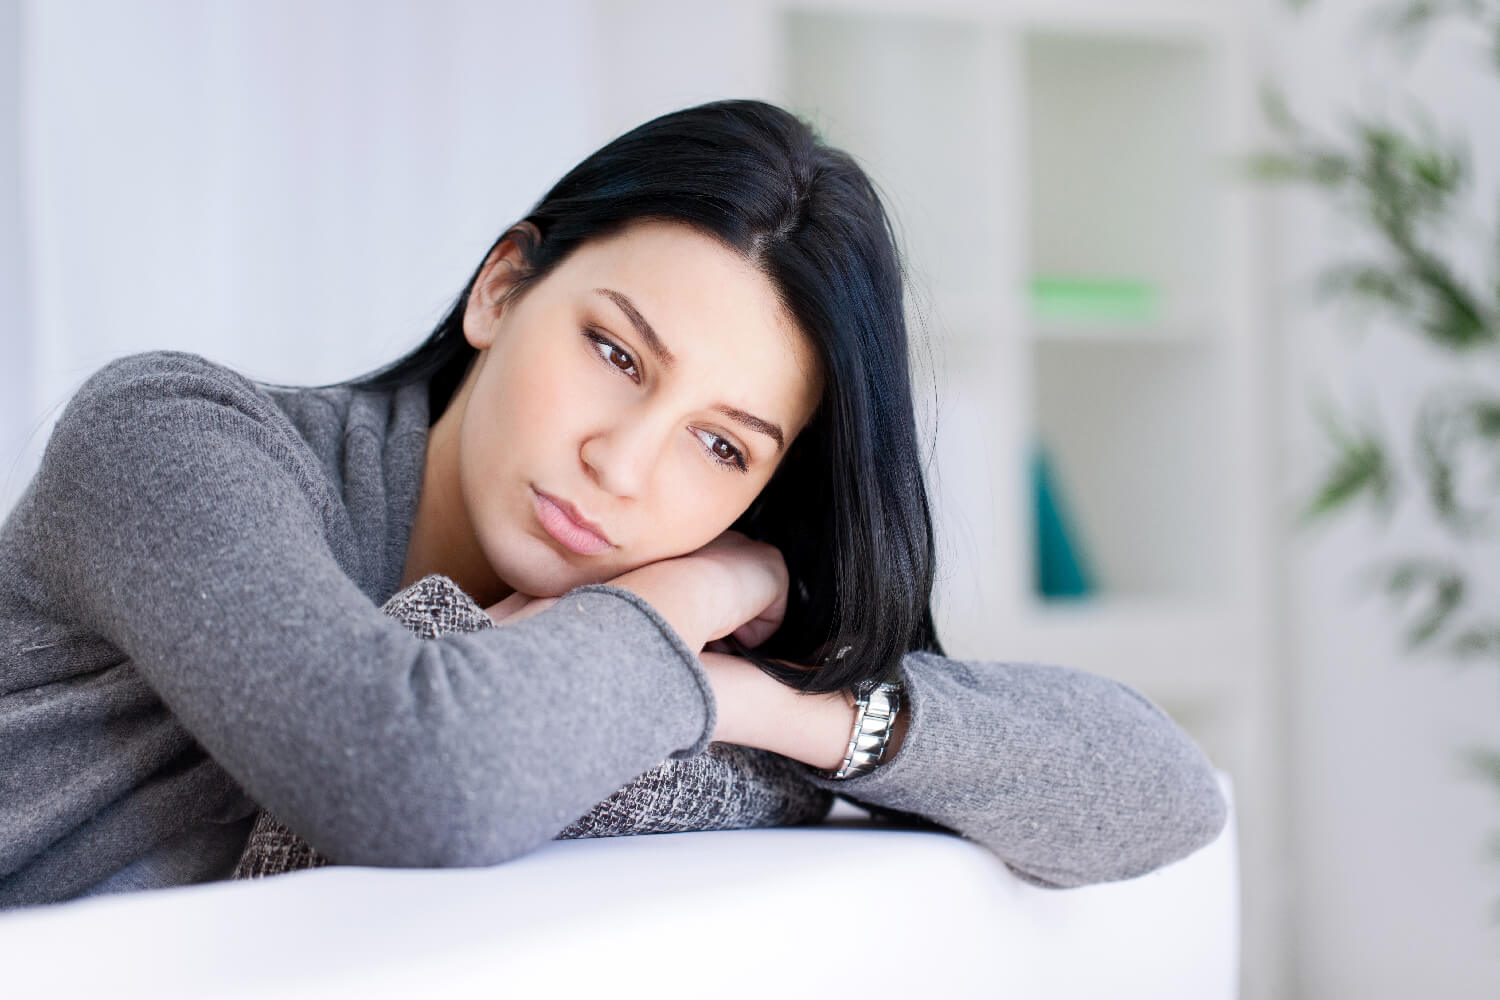 Woman leaning on a couch sad 